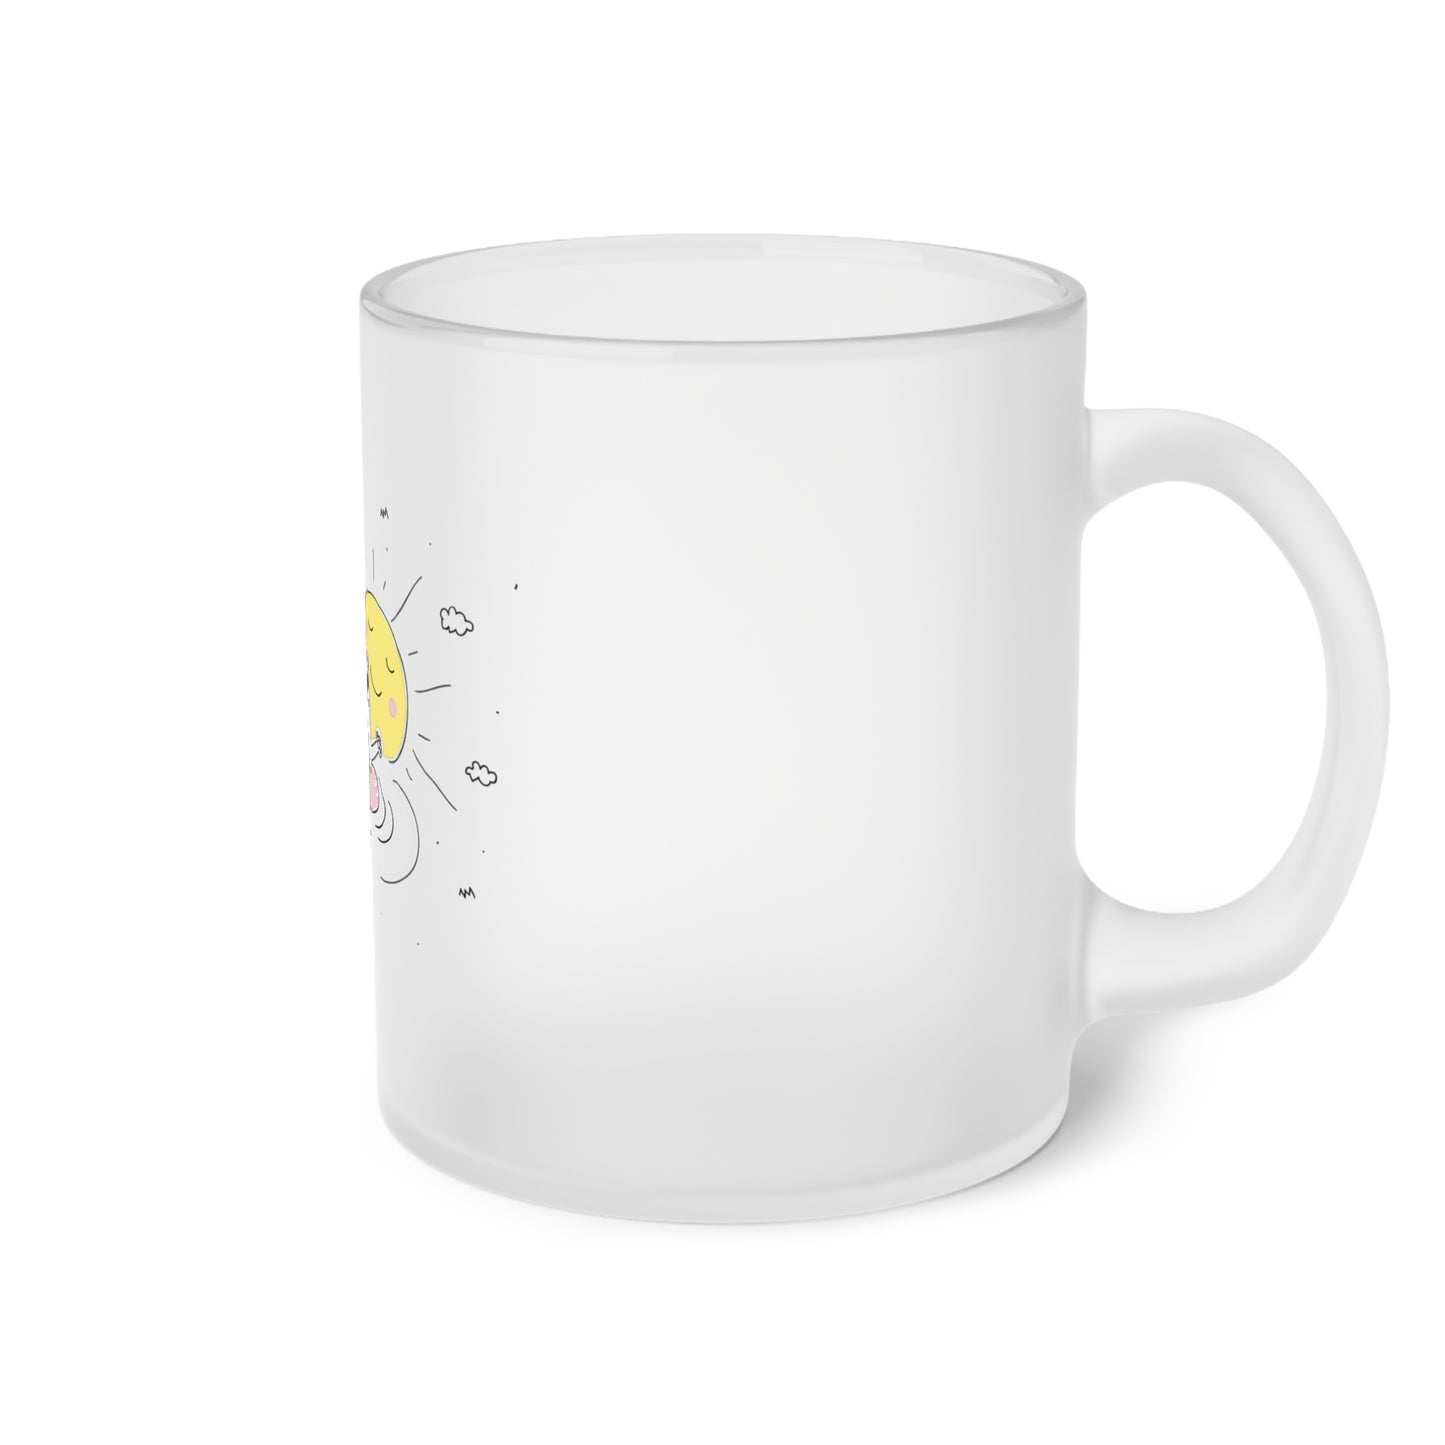 Jingles The Summertime Cat. Frosted Glass Mug